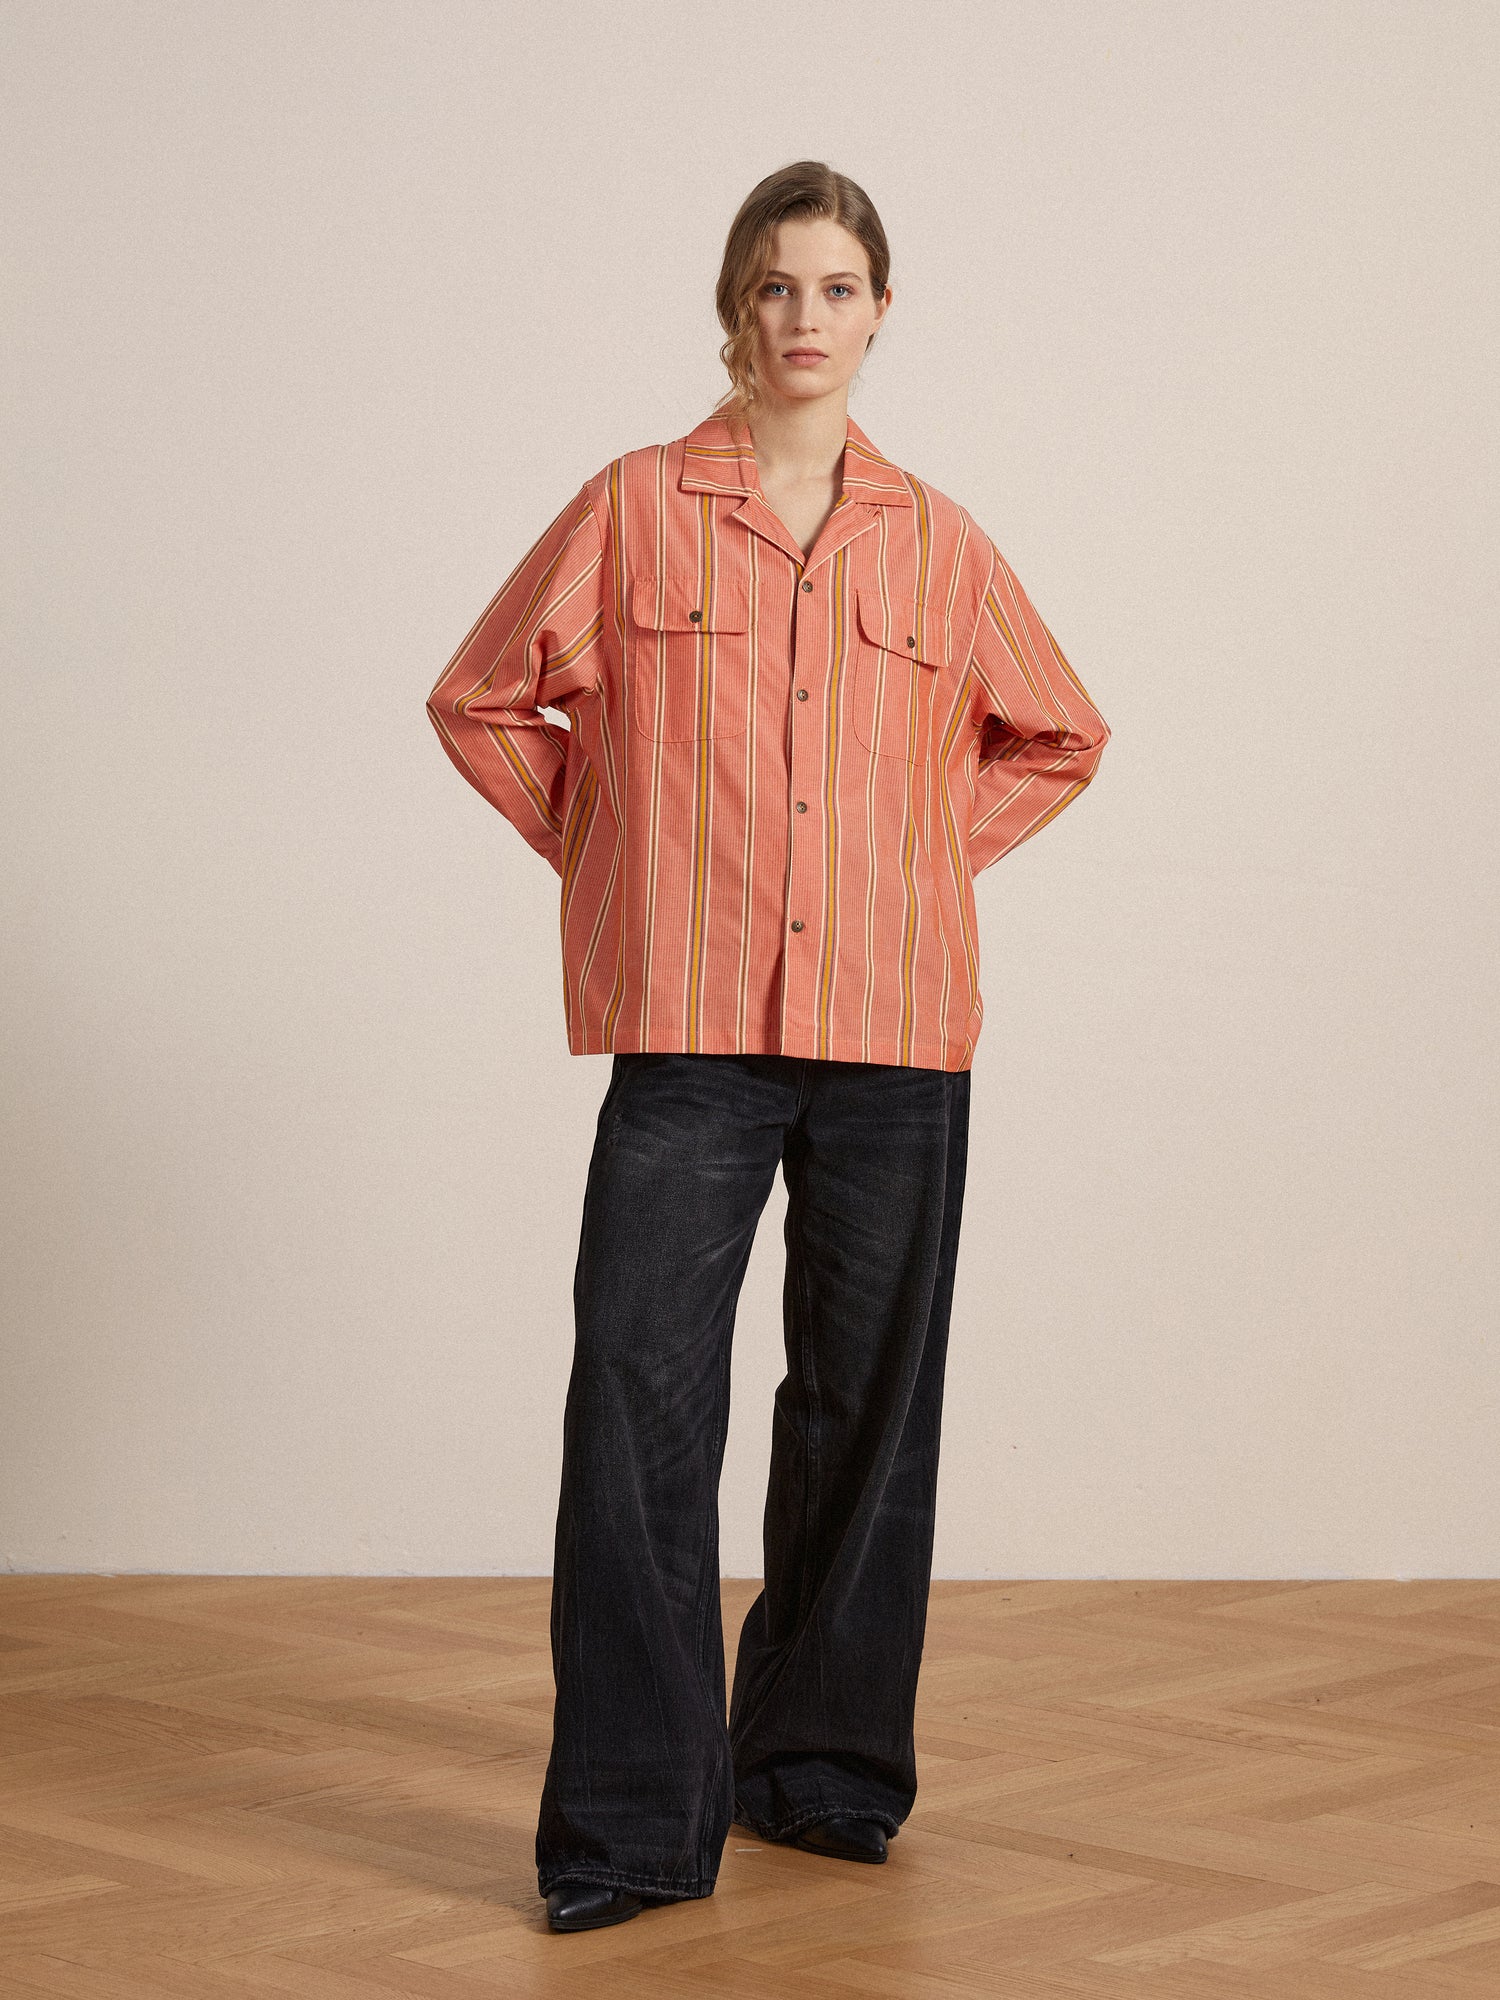 A model wearing a Found Stripe Citrus LS Camp Shirt offering a classic appeal and wide leg pants for a timeless silhouette.